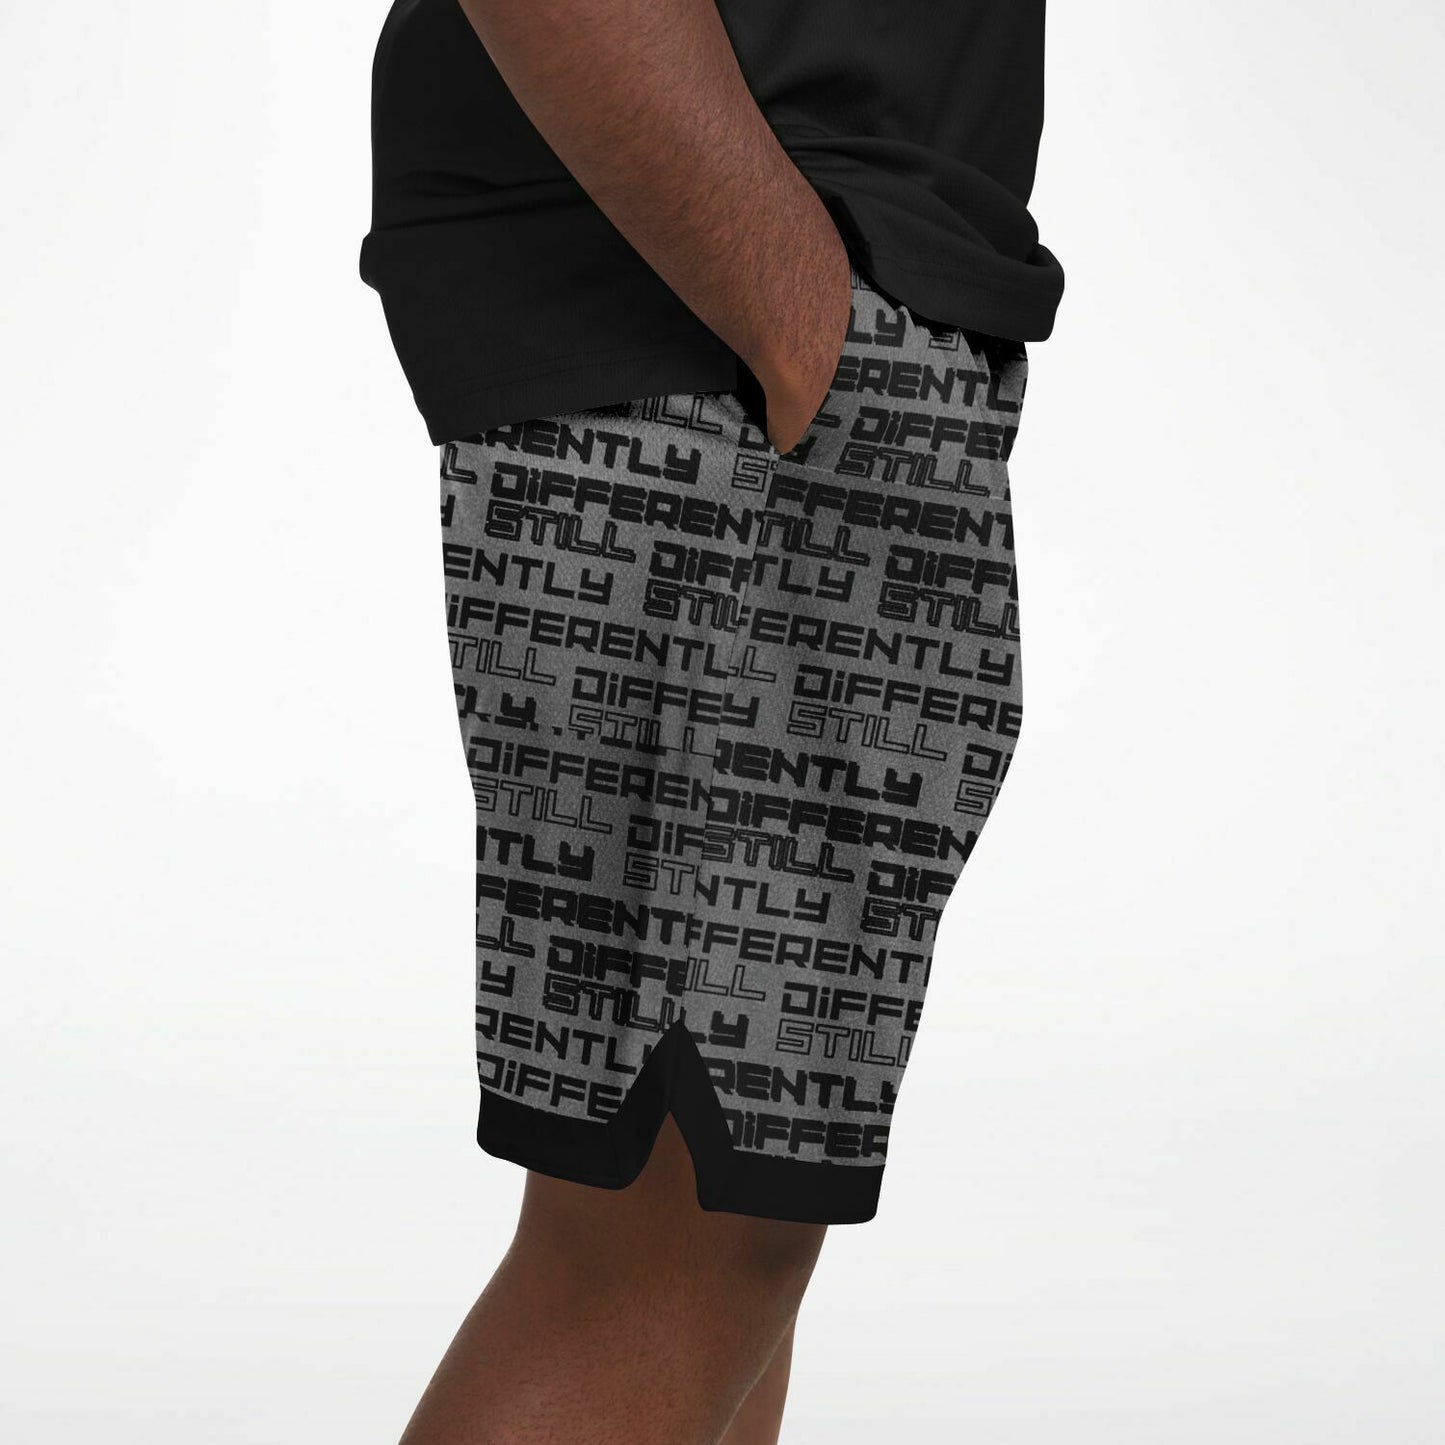 Duntalk "Differently" Classic Basketball Shorts Knight